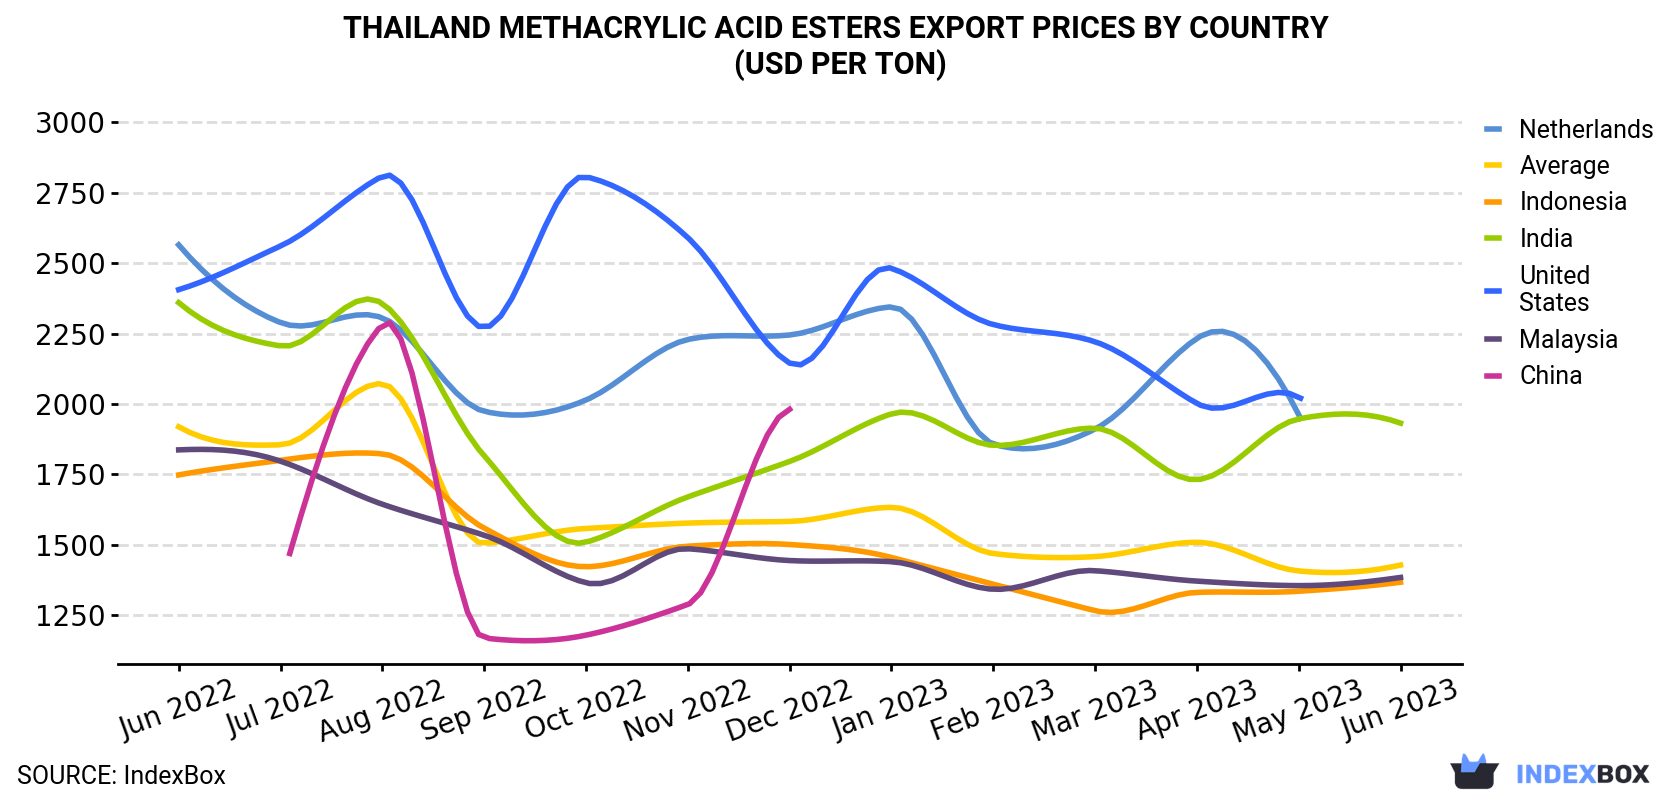 Thailand Methacrylic Acid Esters Export Prices By Country (USD Per Ton)